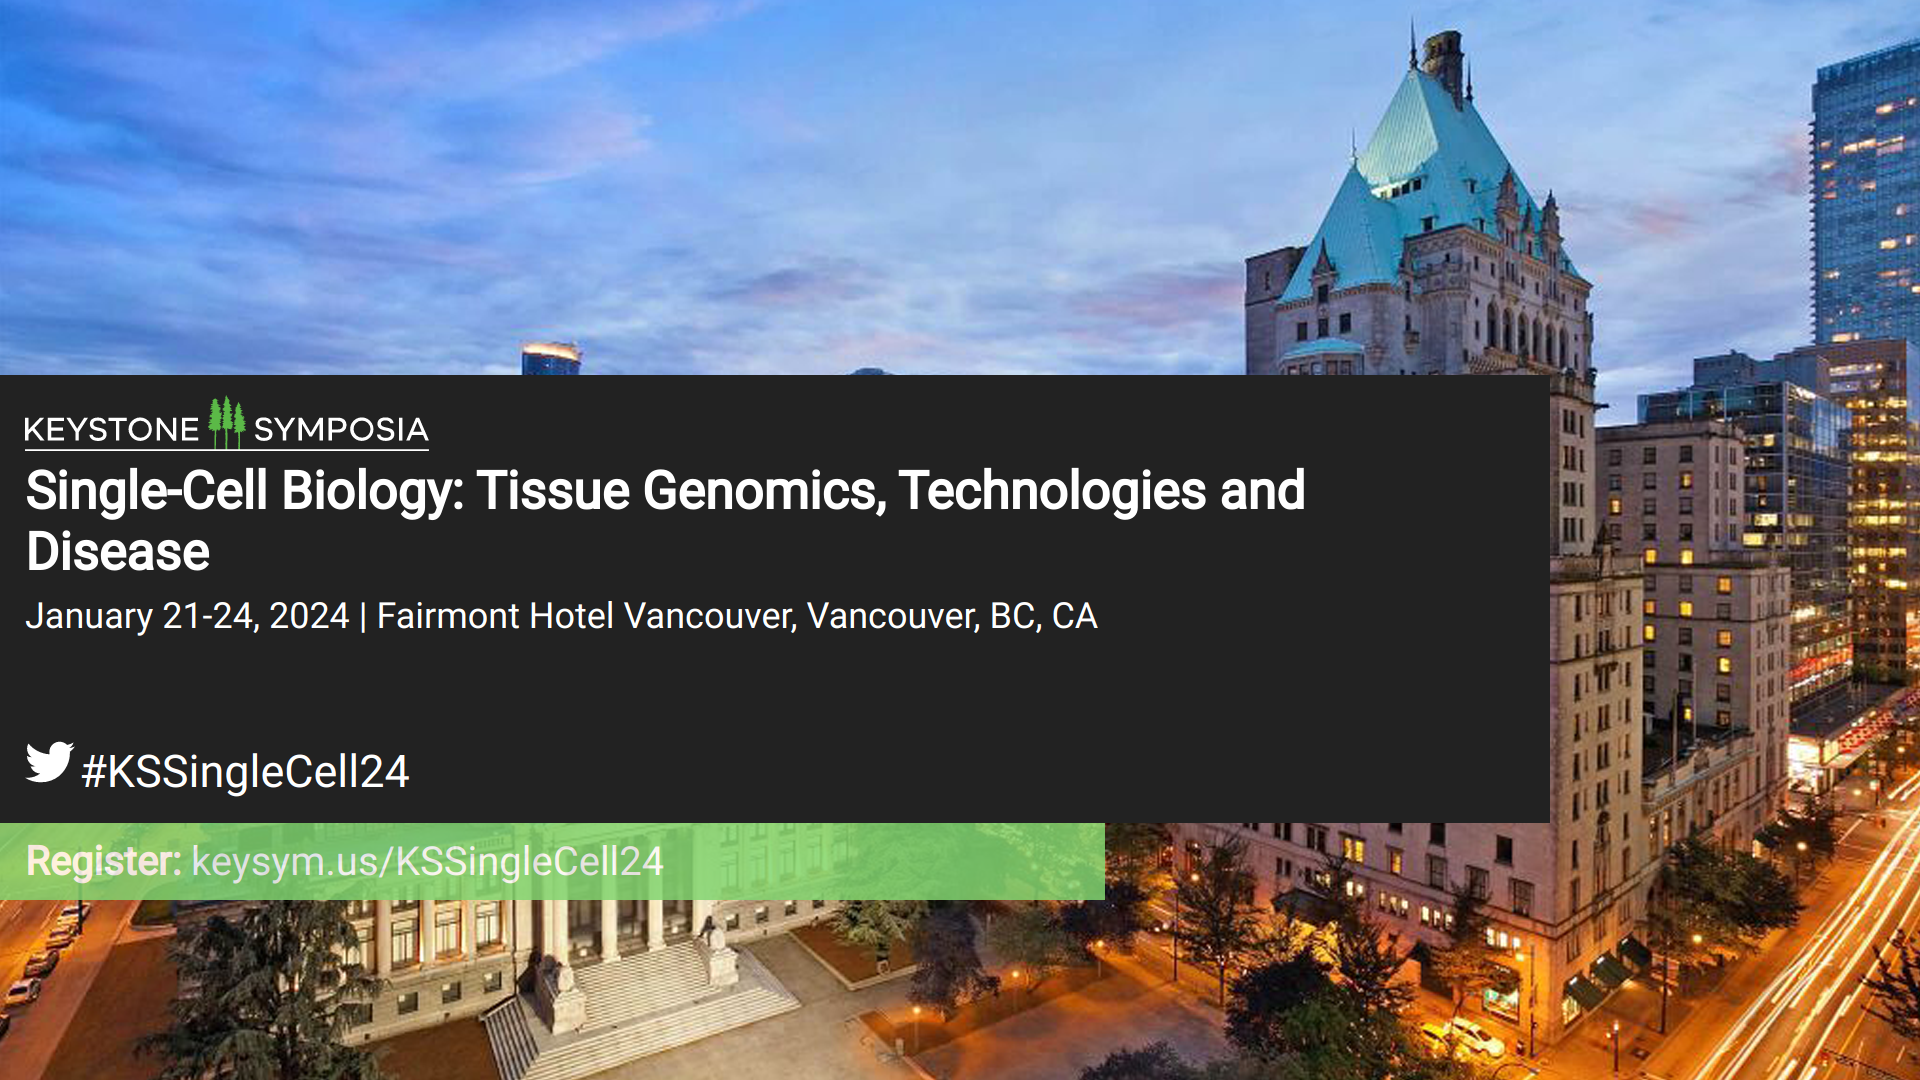 SingleCell Biology Tissue Genomics, Technologies and Disease